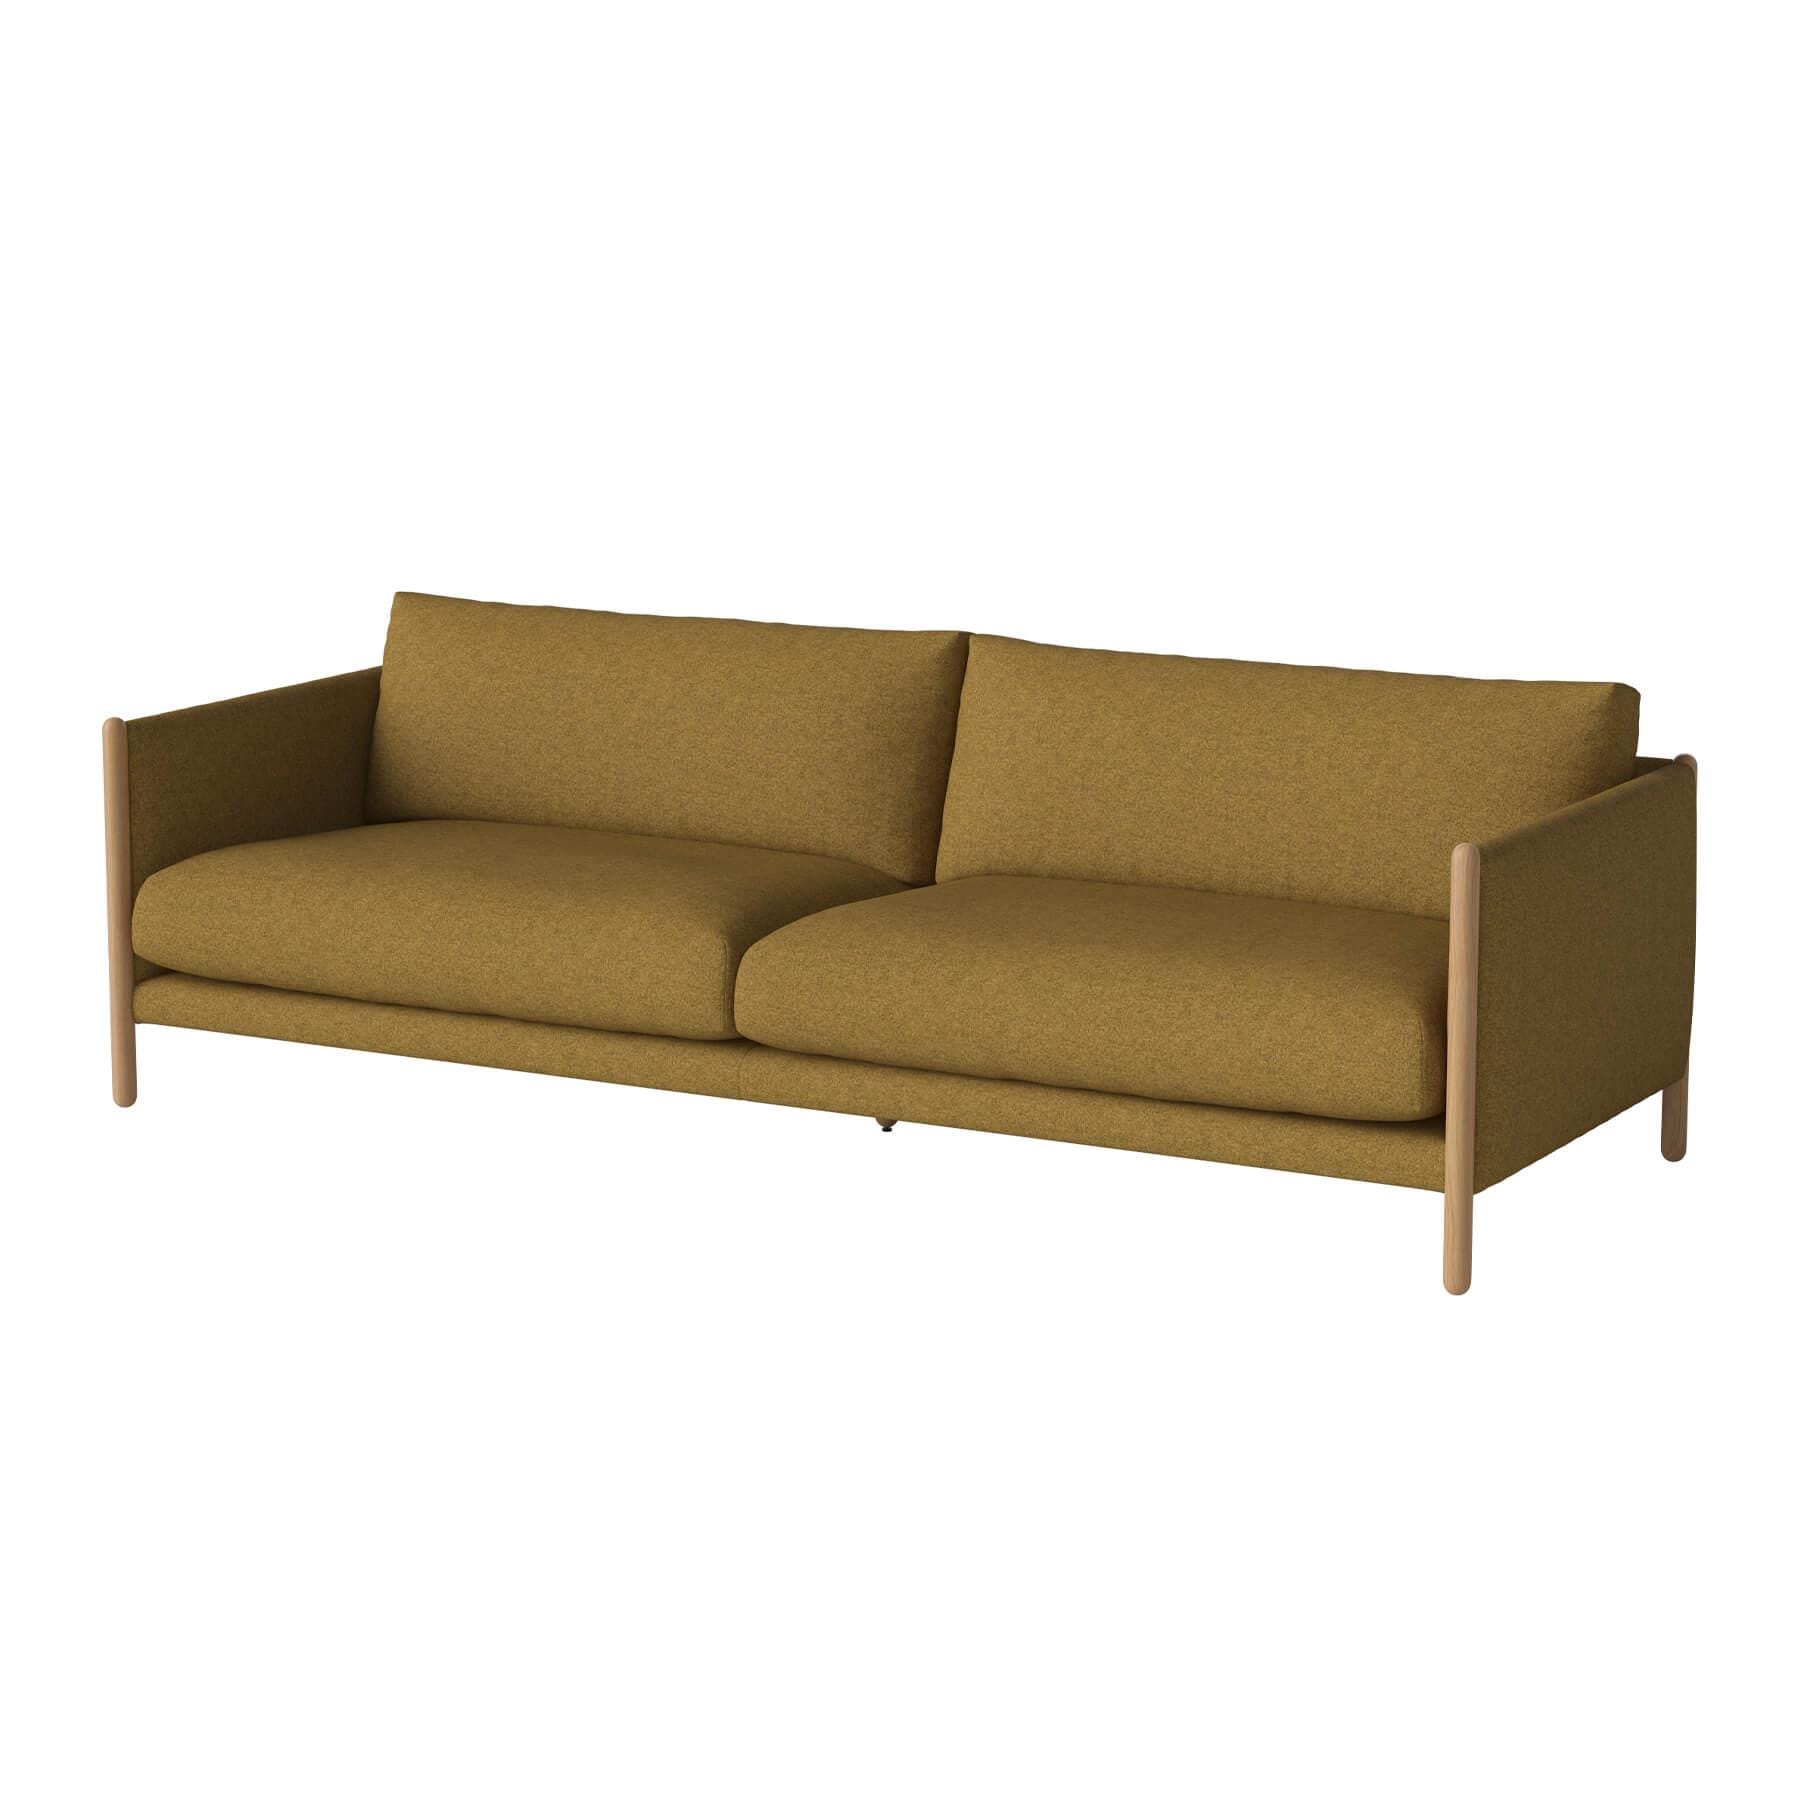 Bolia Hayden Sofa 25 Seater Sofa Oiled Oak Qual Curry Brown Designer Furniture From Holloways Of Ludlow